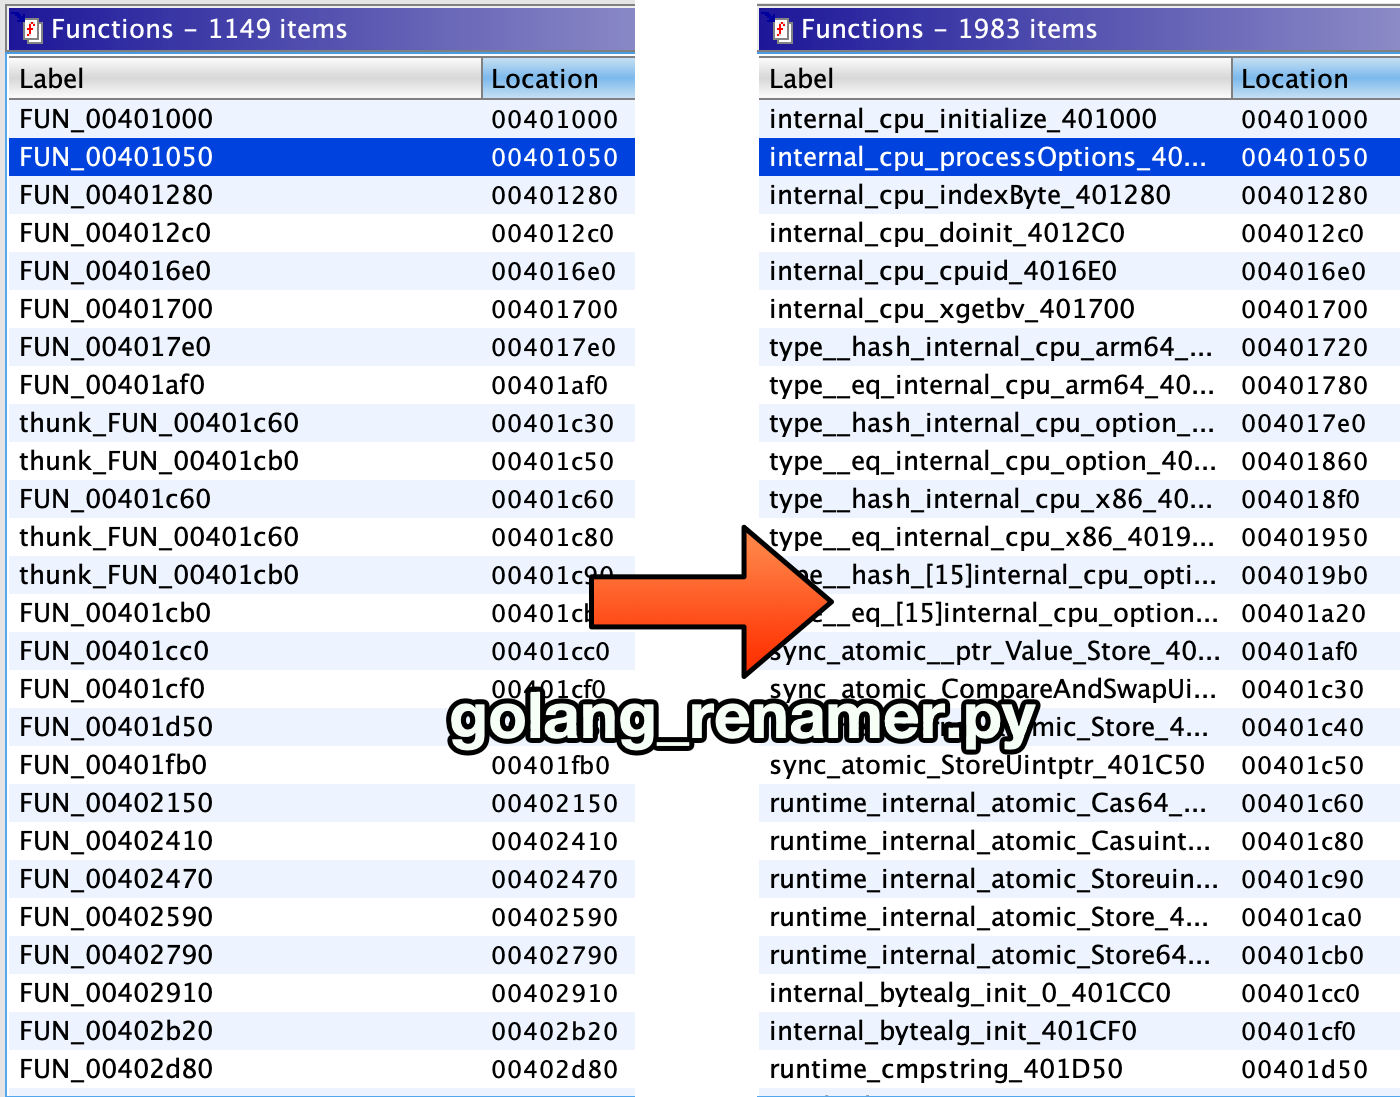 Example result: Function names restored by golang_renamer.py